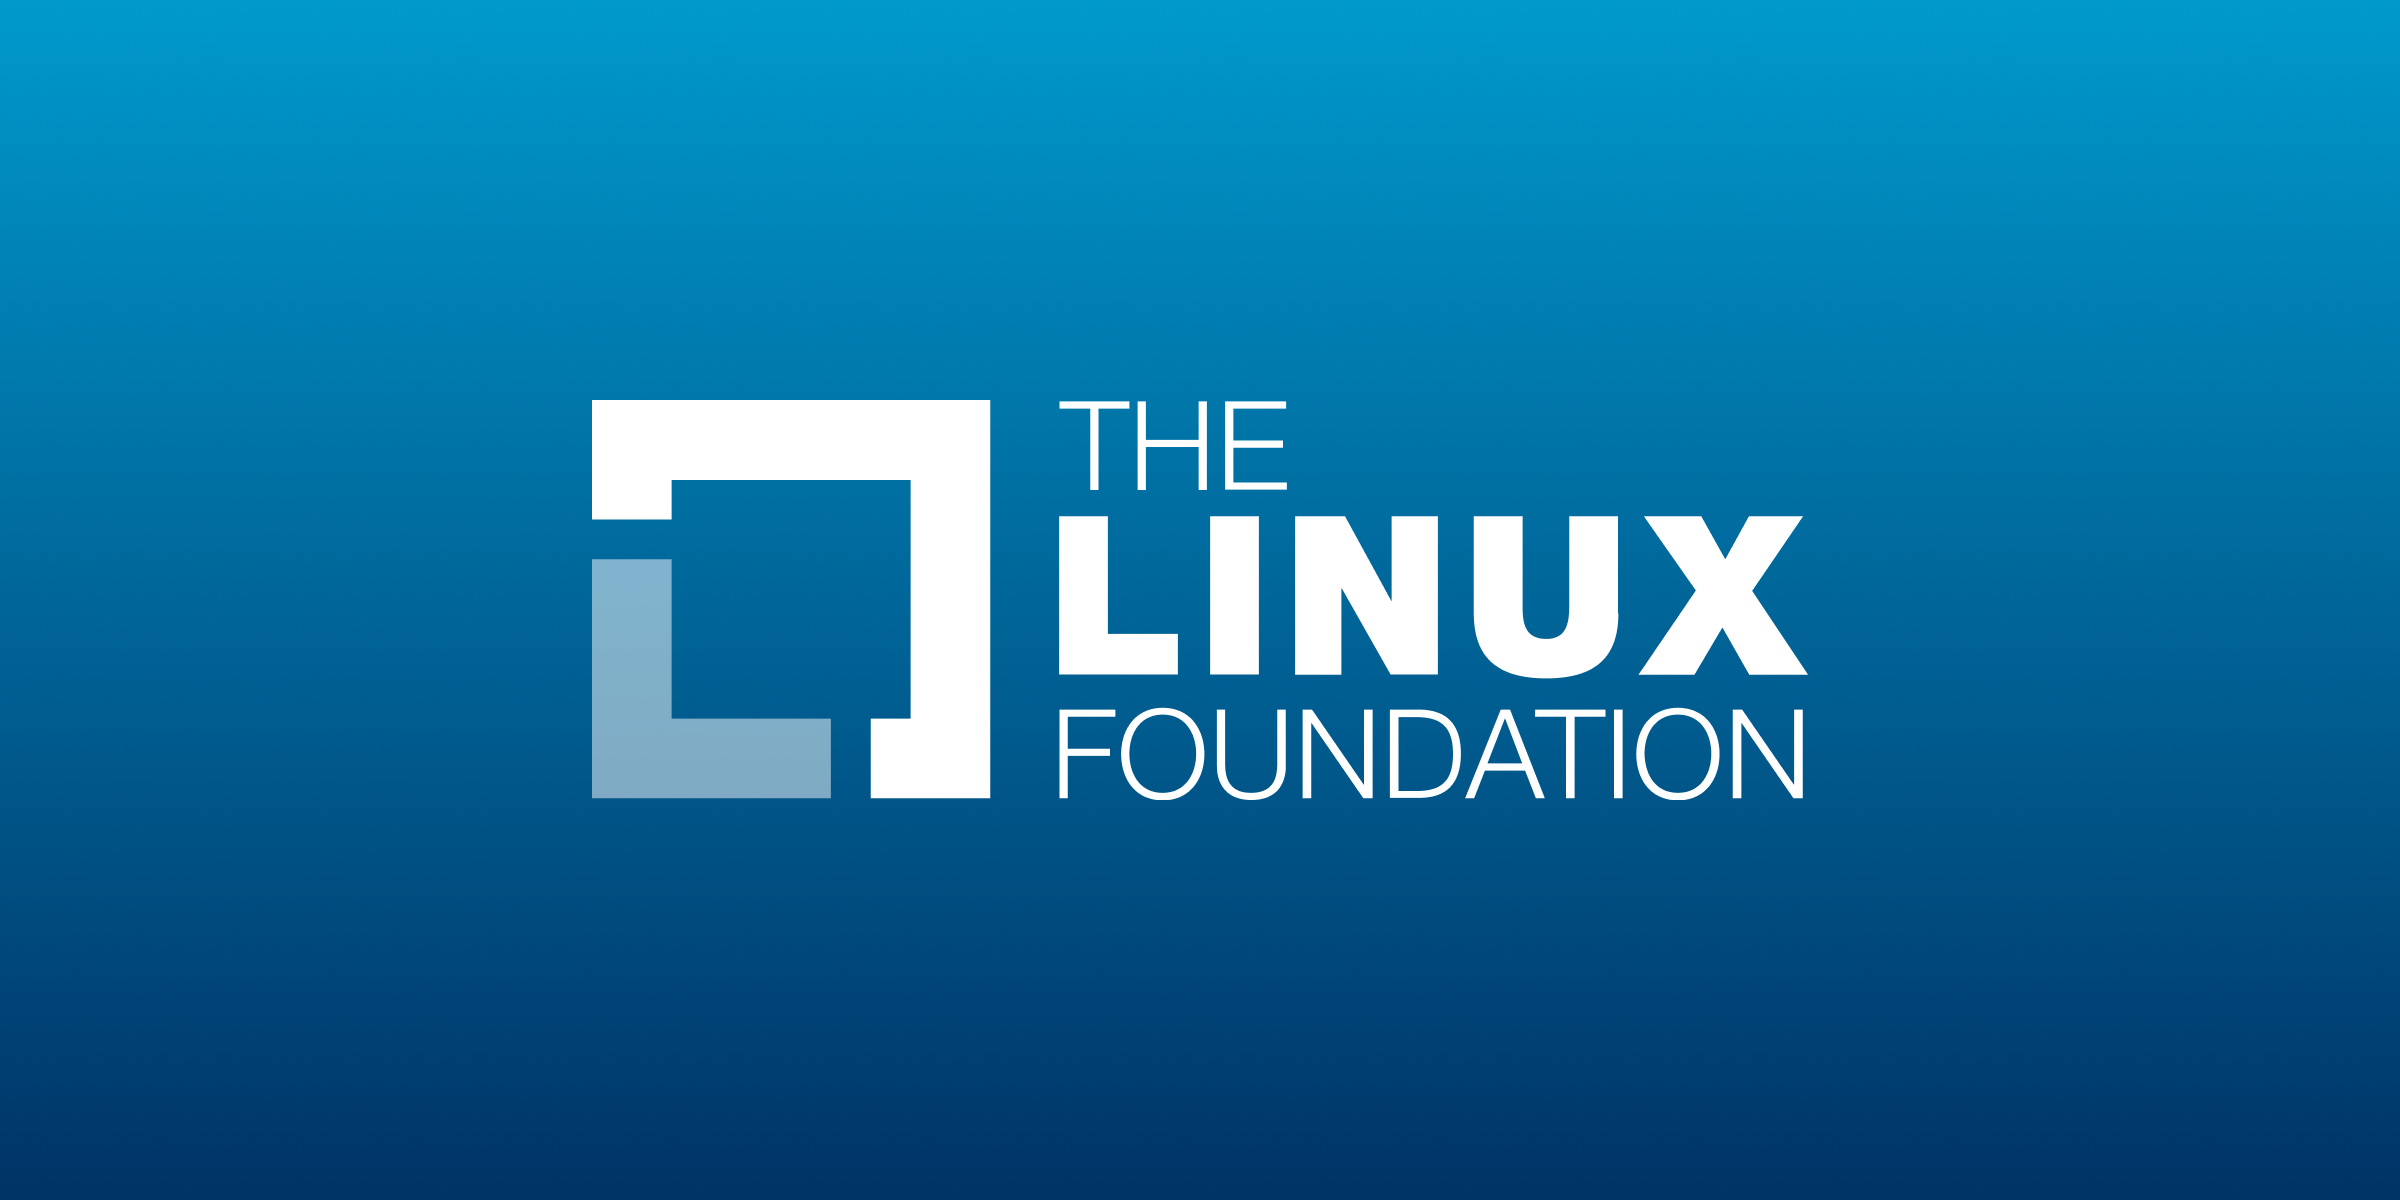 6 Takeaways from the Linux Foundation's SBOM Report